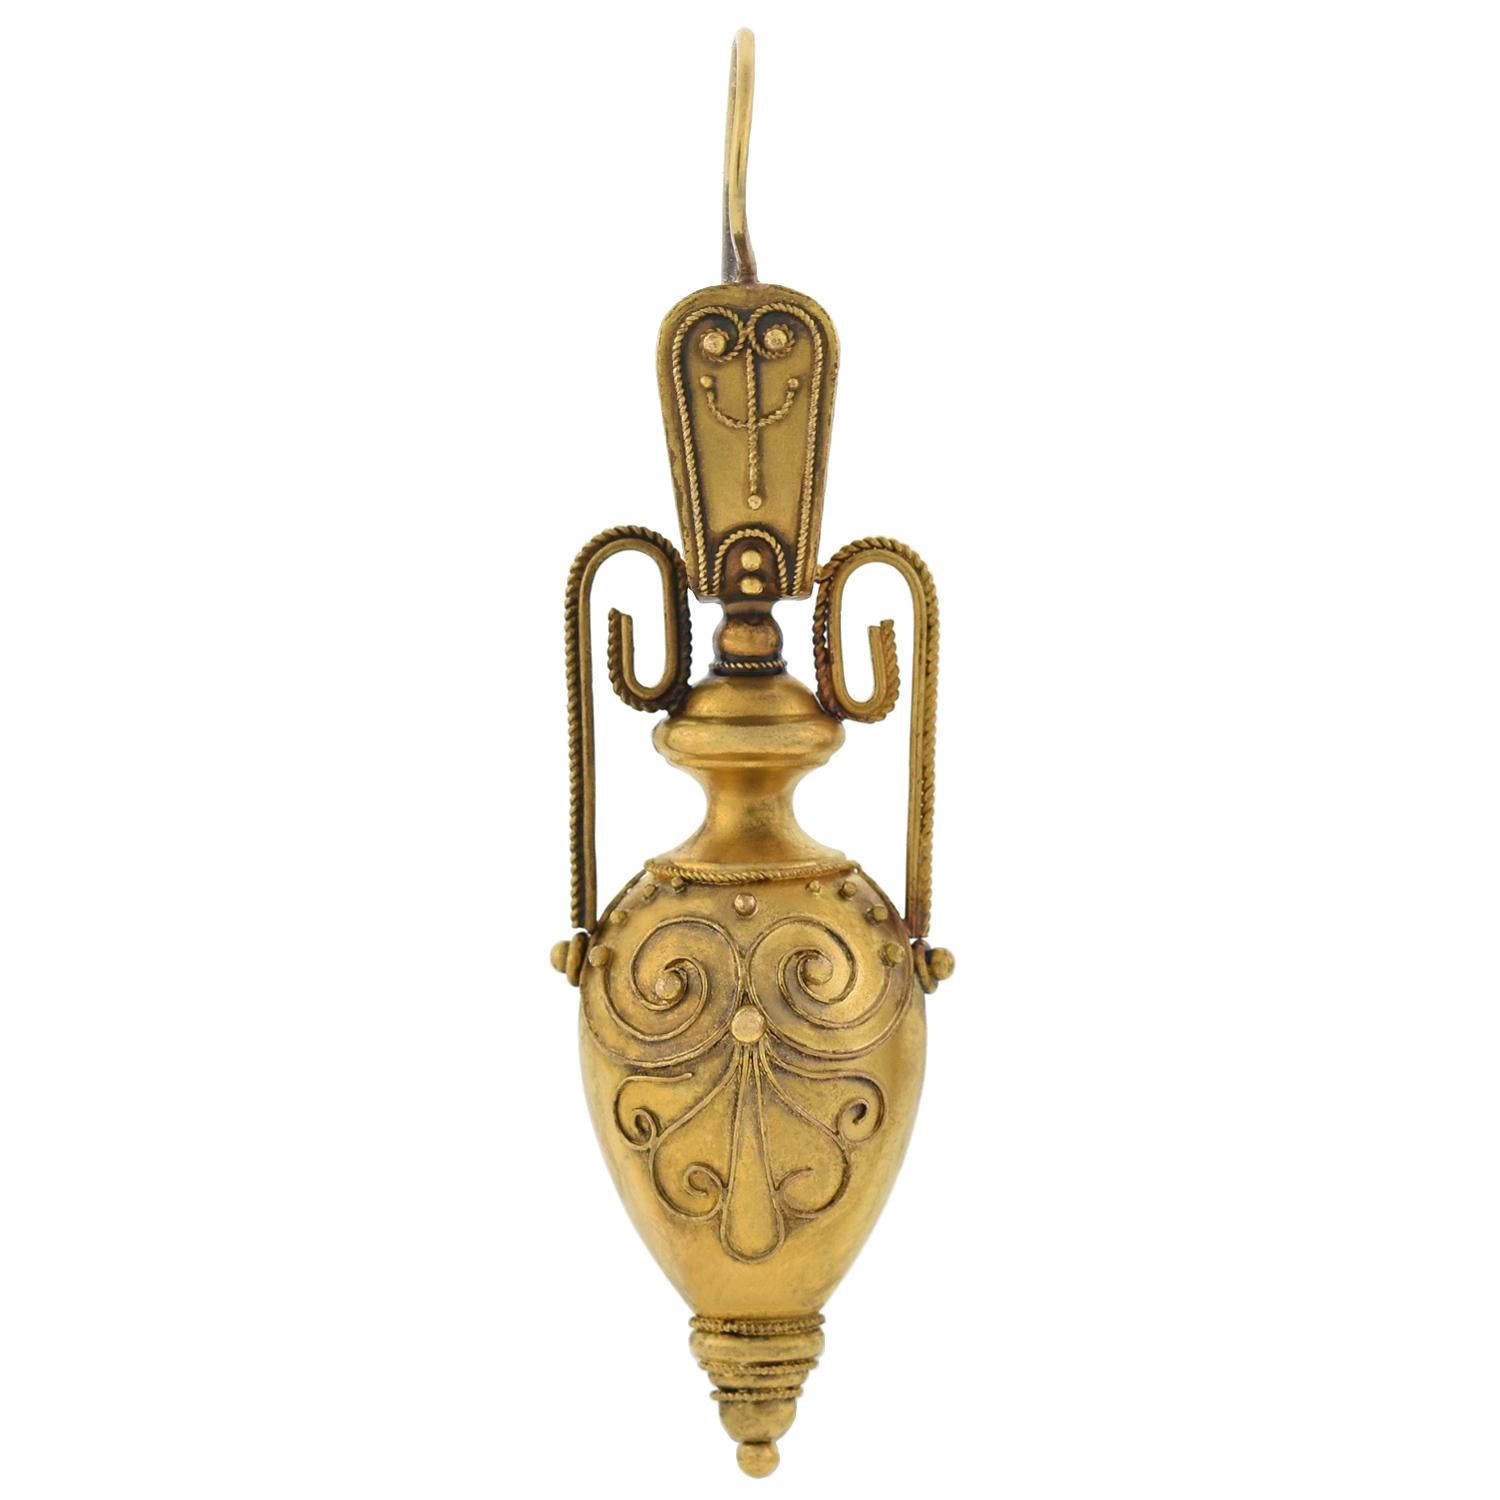 A stunning pair of Etruscan urn earrings from the Victorian (ca1880) era! Crafted in 15kt yellow gold, each 3-dimensional shaped piece displays a smoothly polished surface with wonderful Etruscan details. Adorning the front surface of each urn are